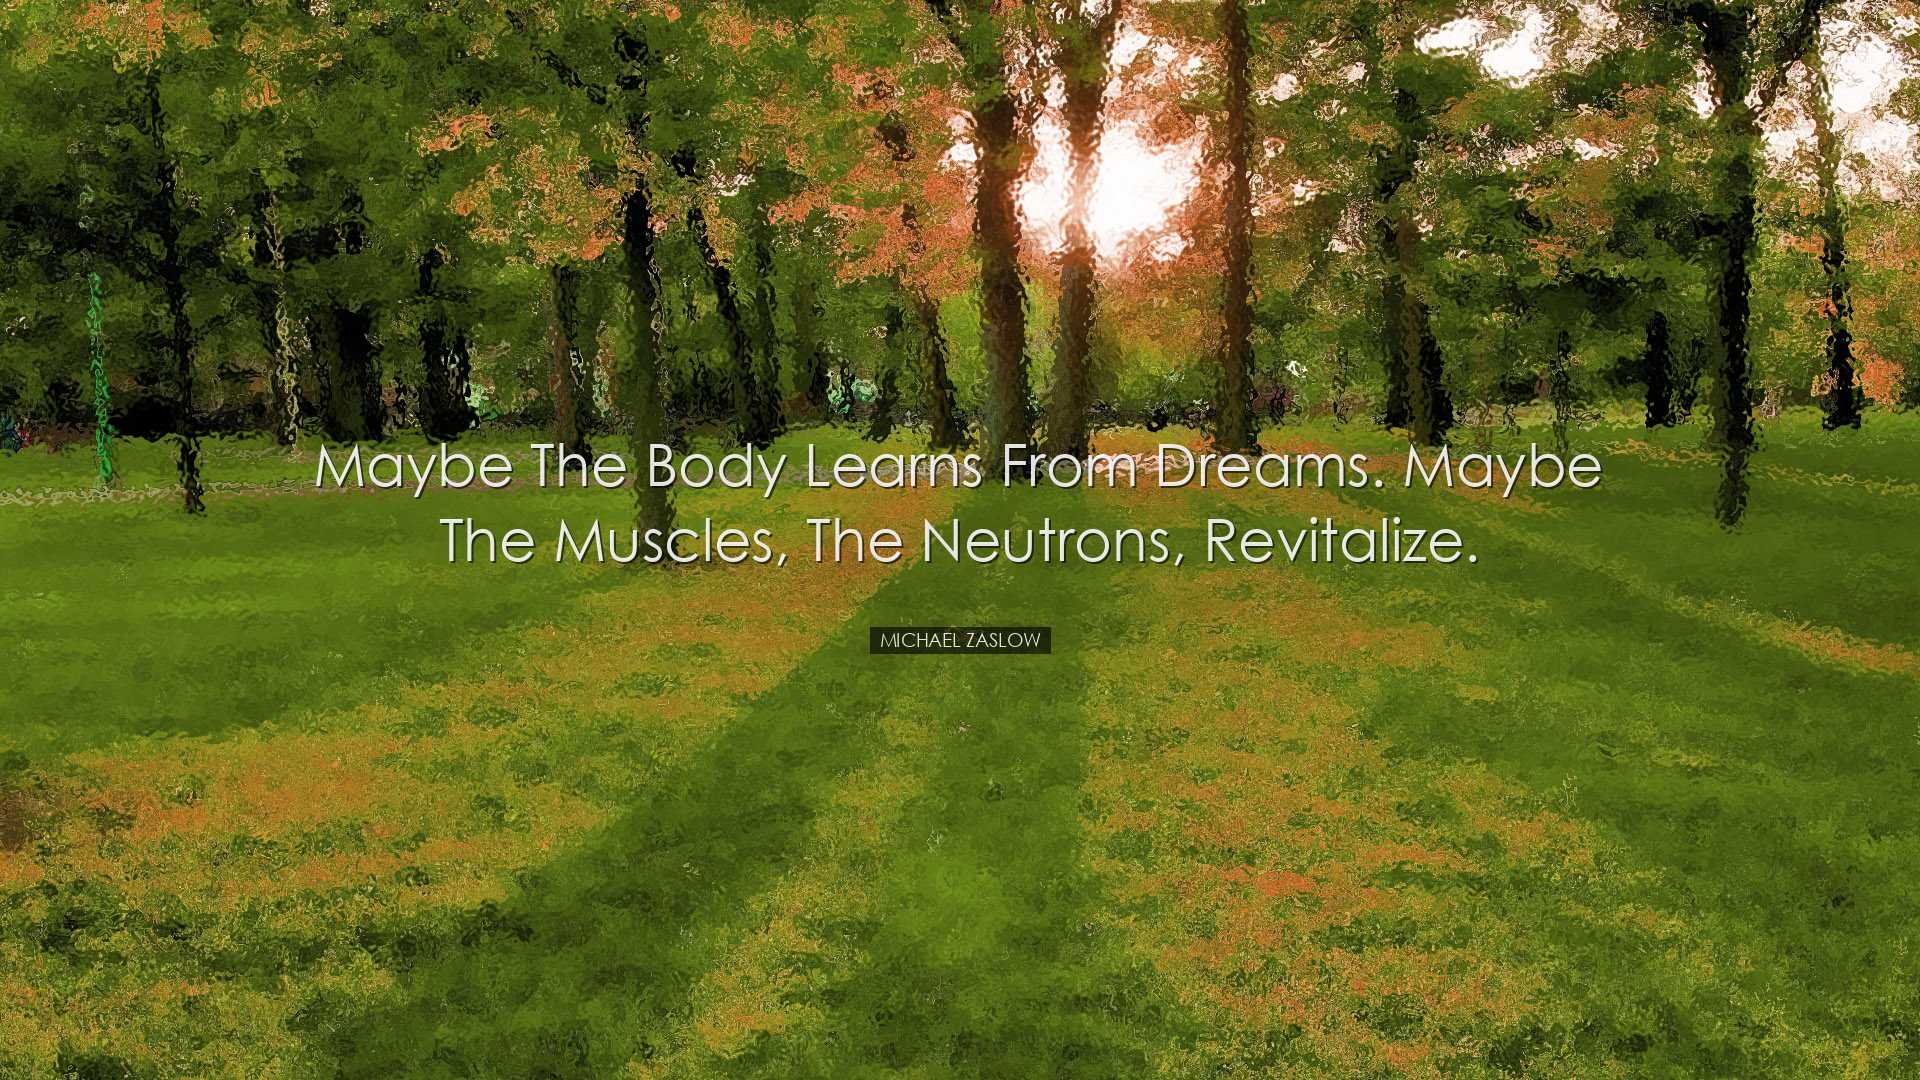 Maybe the body learns from dreams. Maybe the muscles, the neutrons